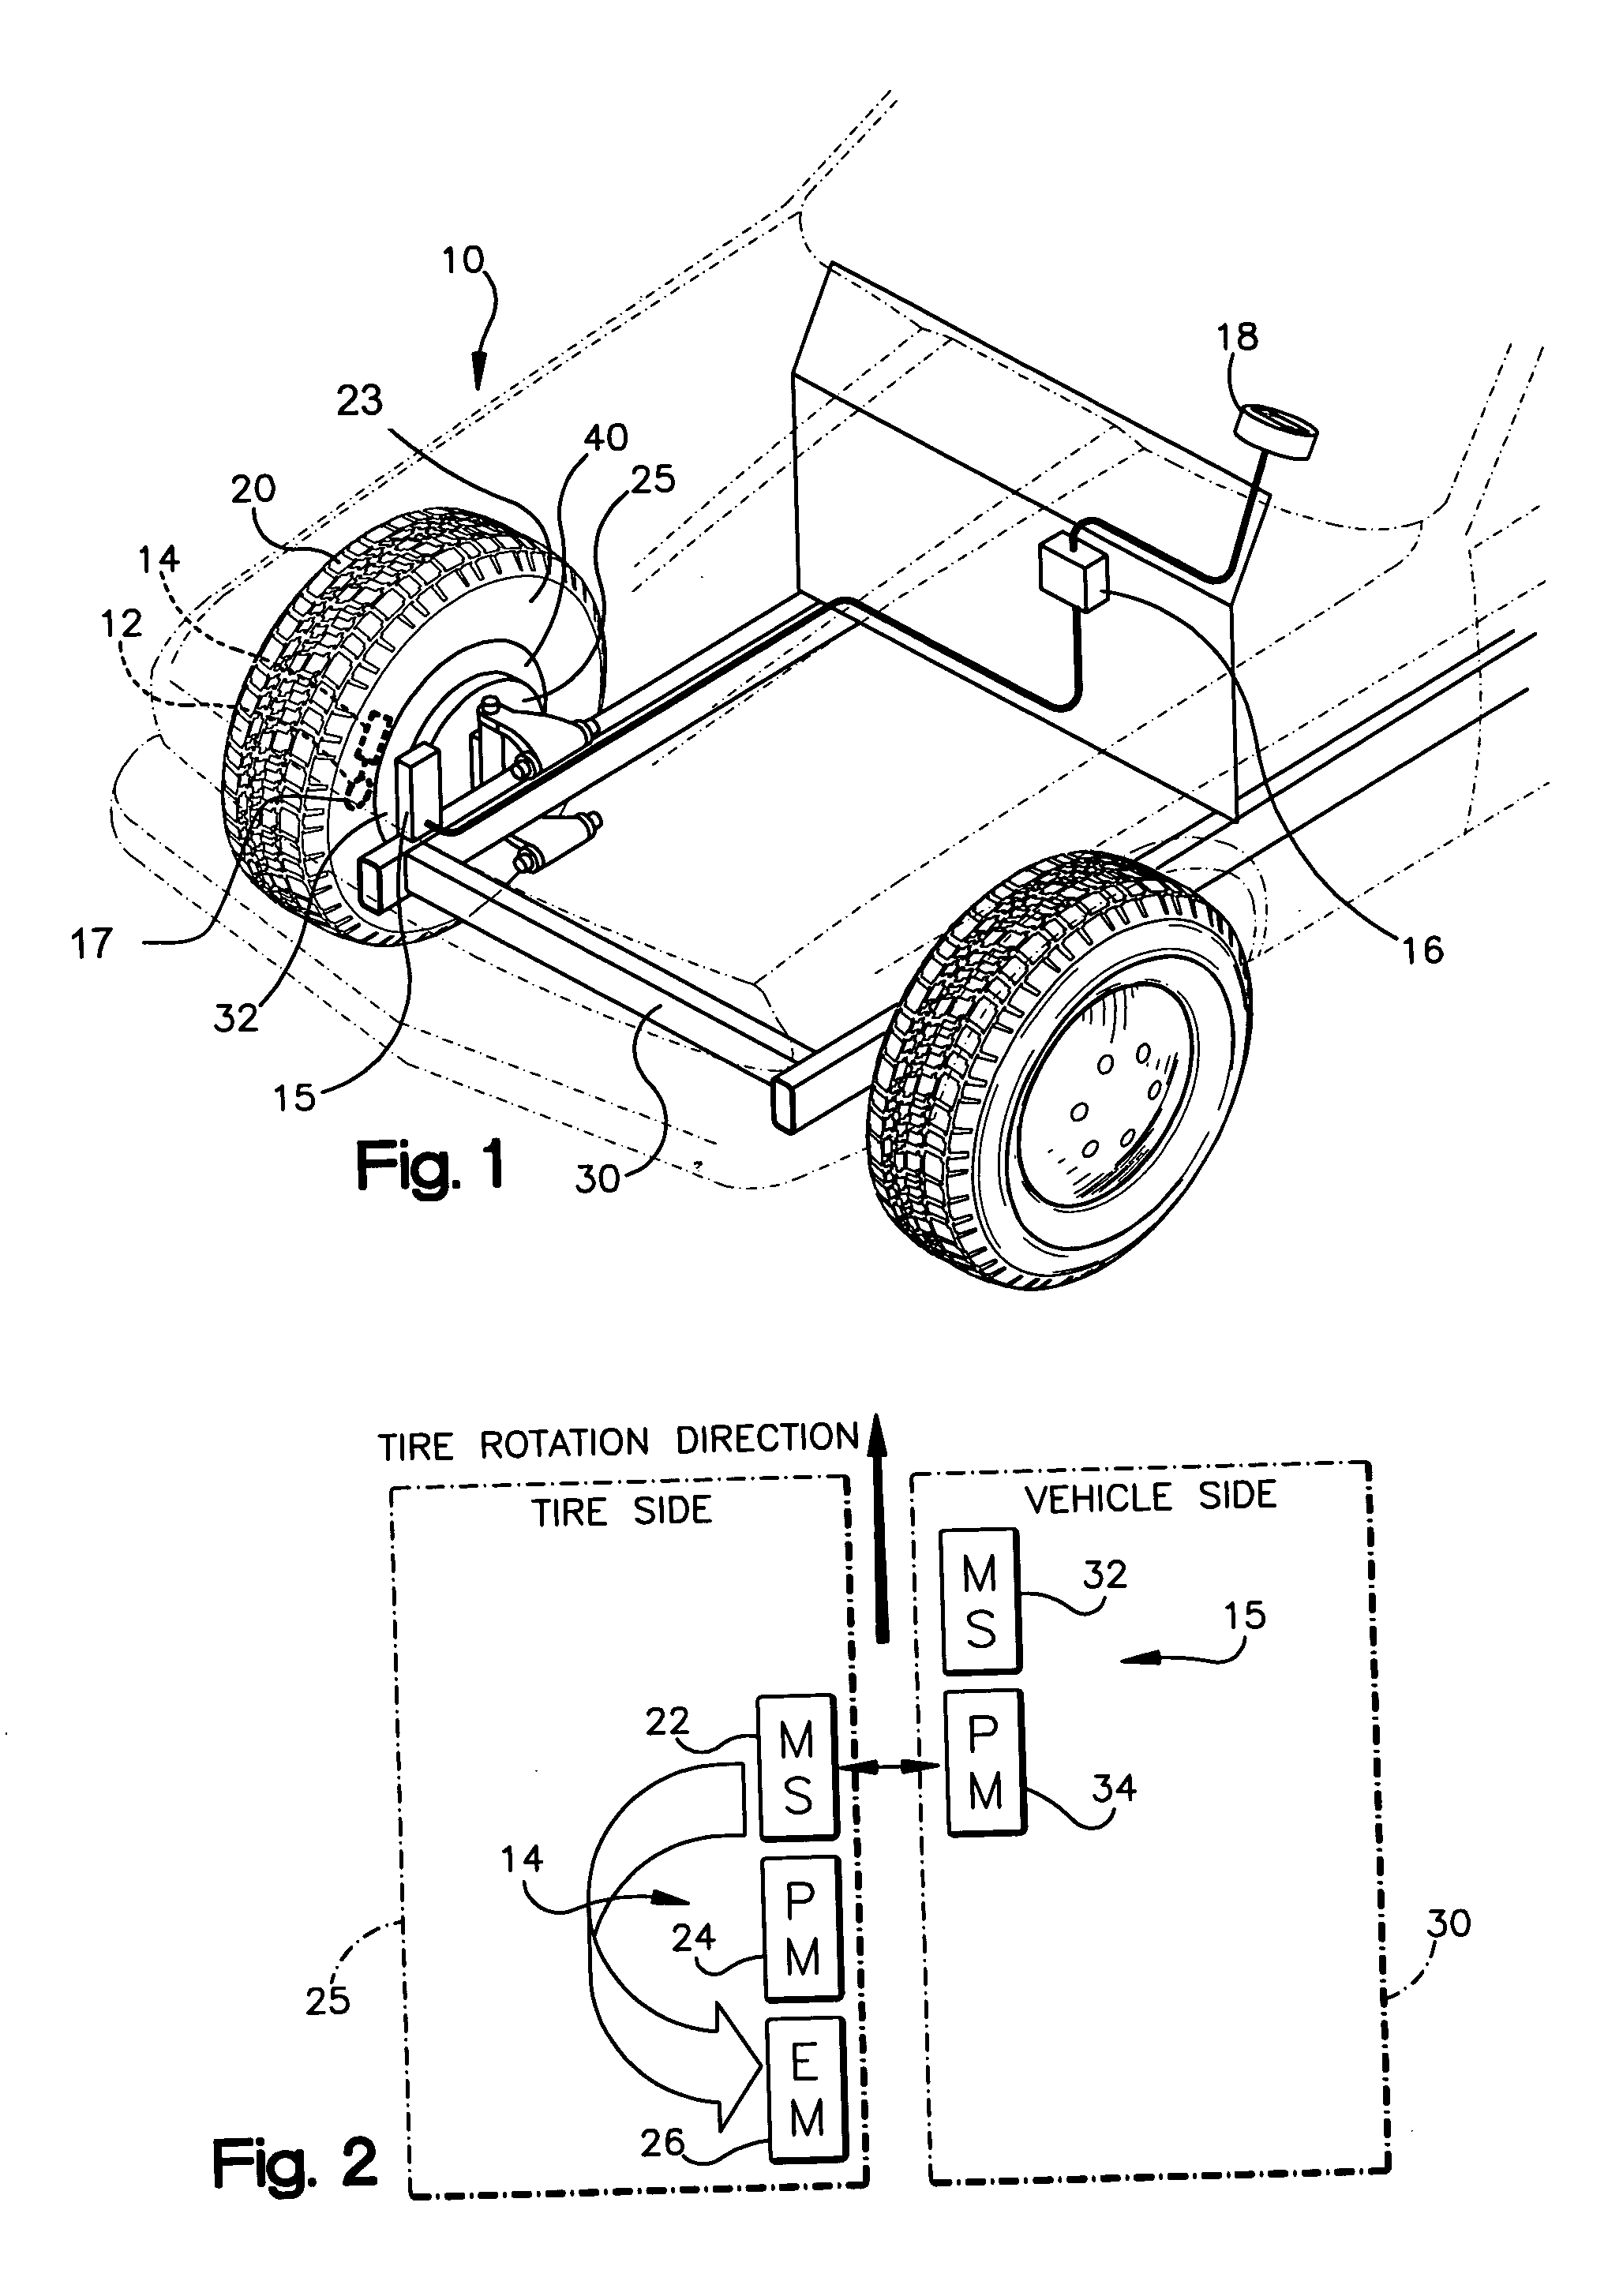 Magnetic transmitter and receiver for a tire pressure monitoring system